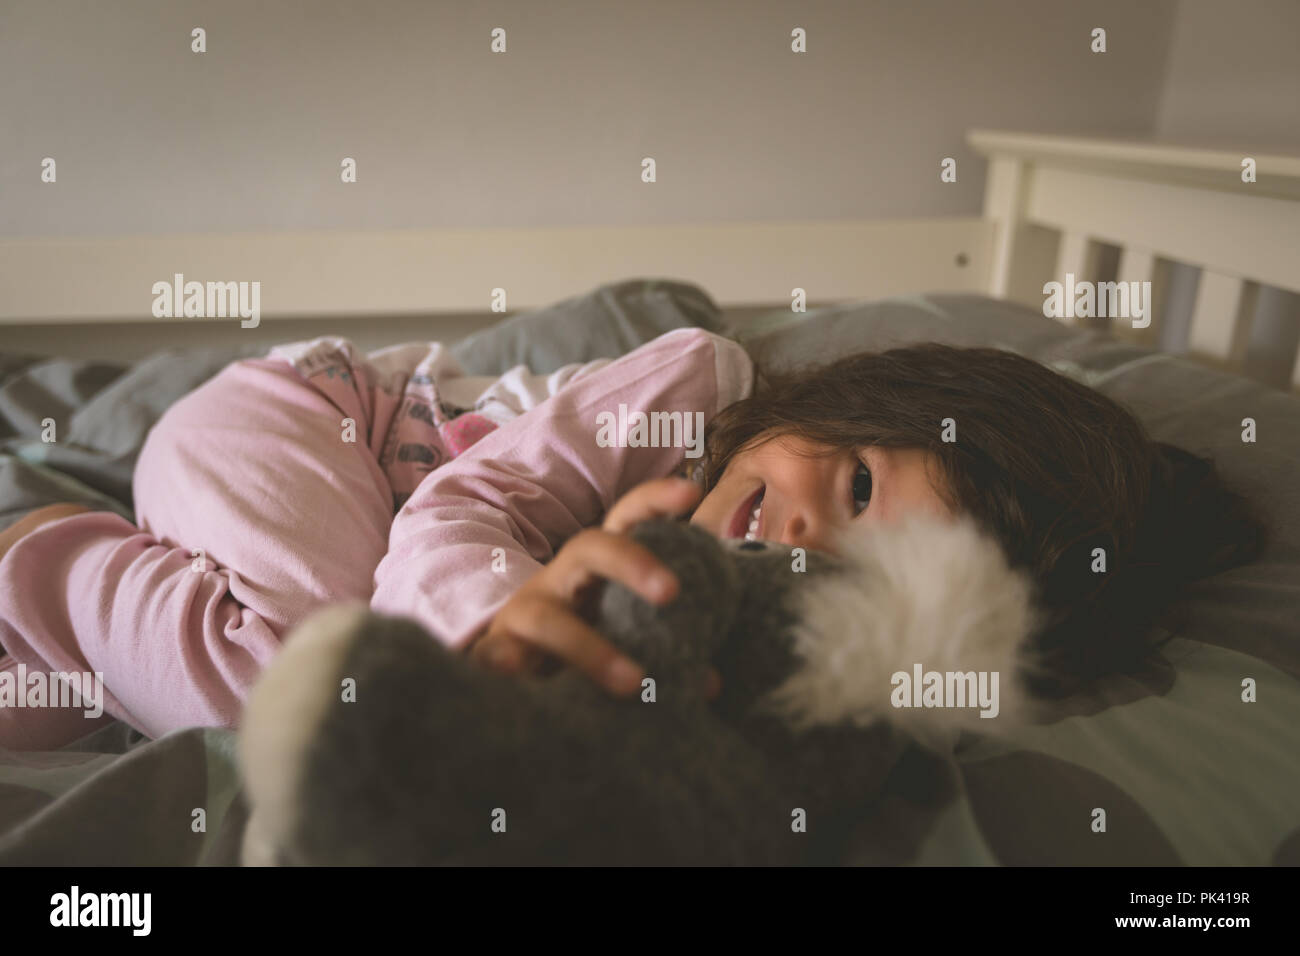 Girl Playing with teddy bear on bed Banque D'Images